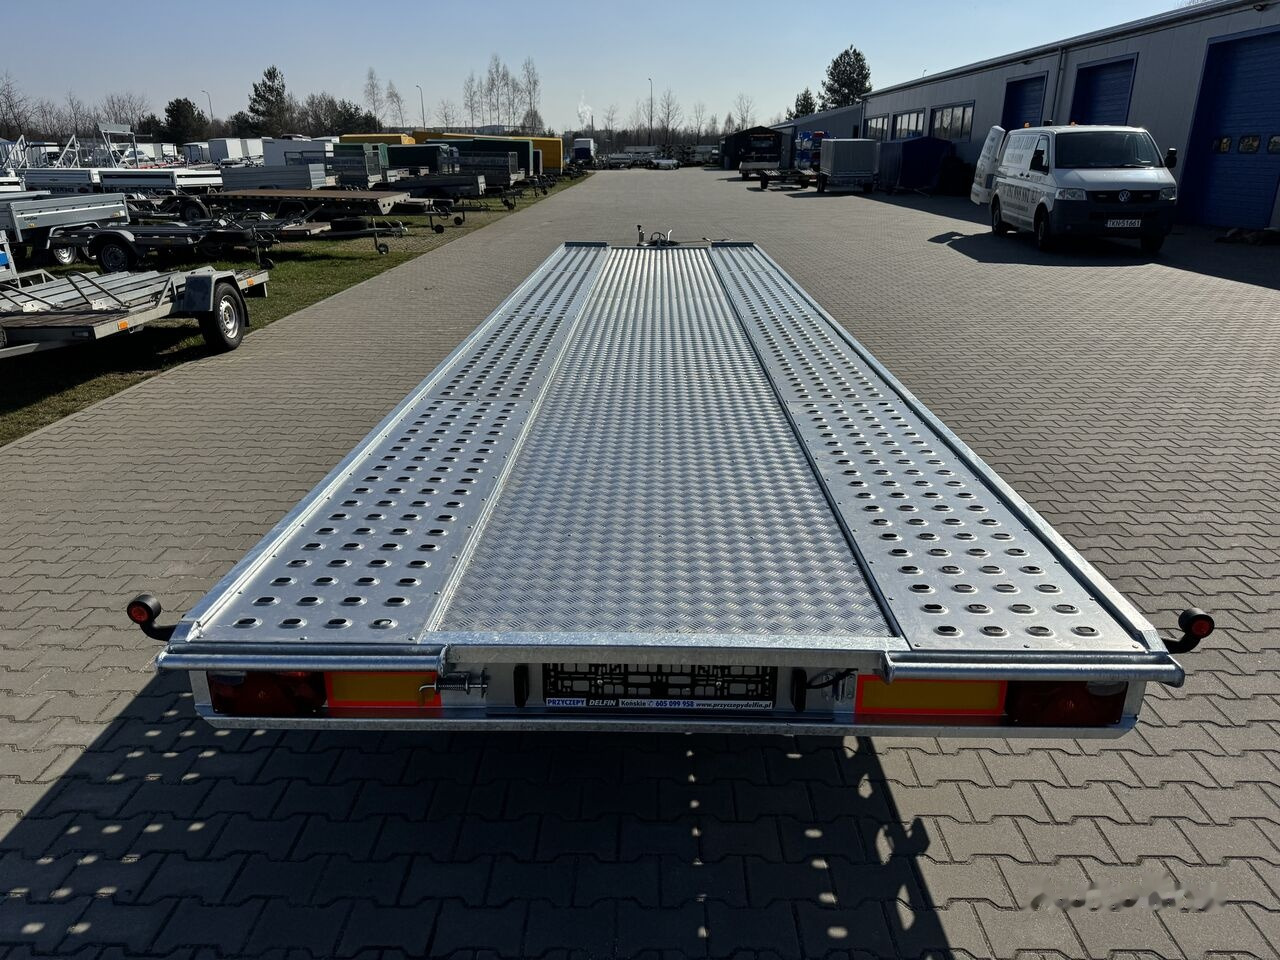 Remorque porte-voitures neuf Wiola L35G85 8.5m long trailer with 3 axles for transport of 2 cars: photos 9